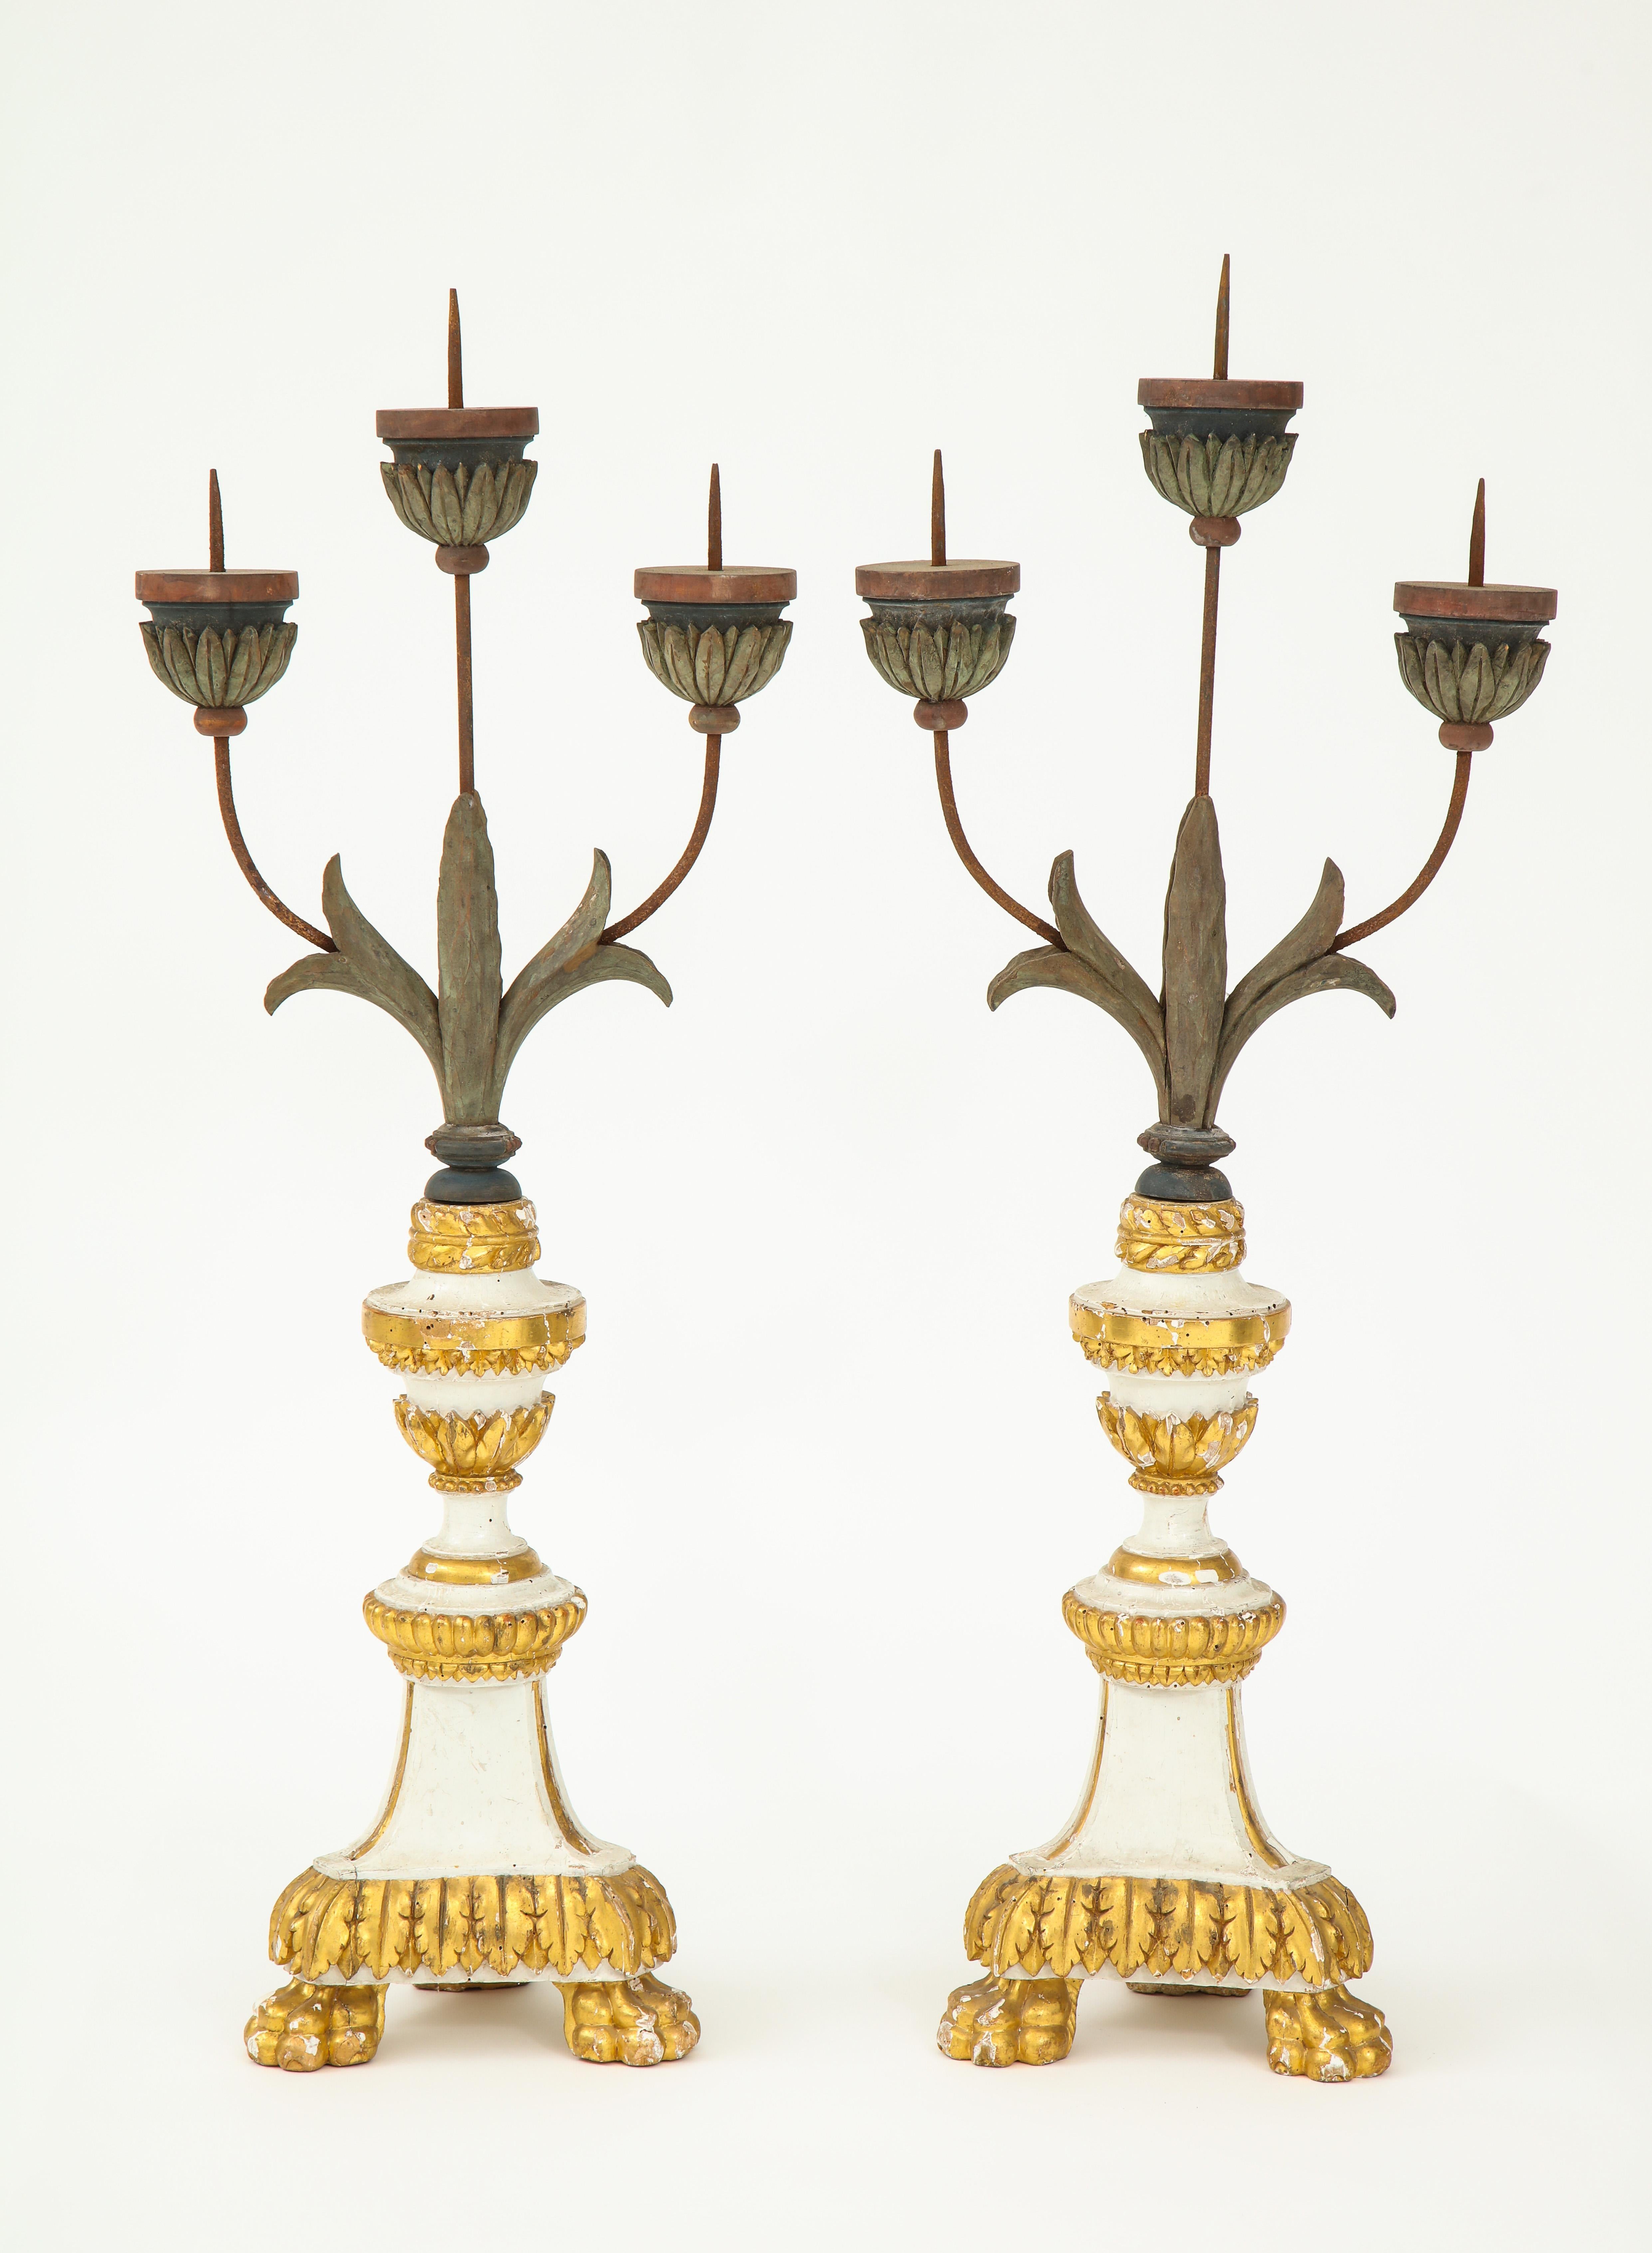 Fantastic and tall three armed hand carved candlesticks.